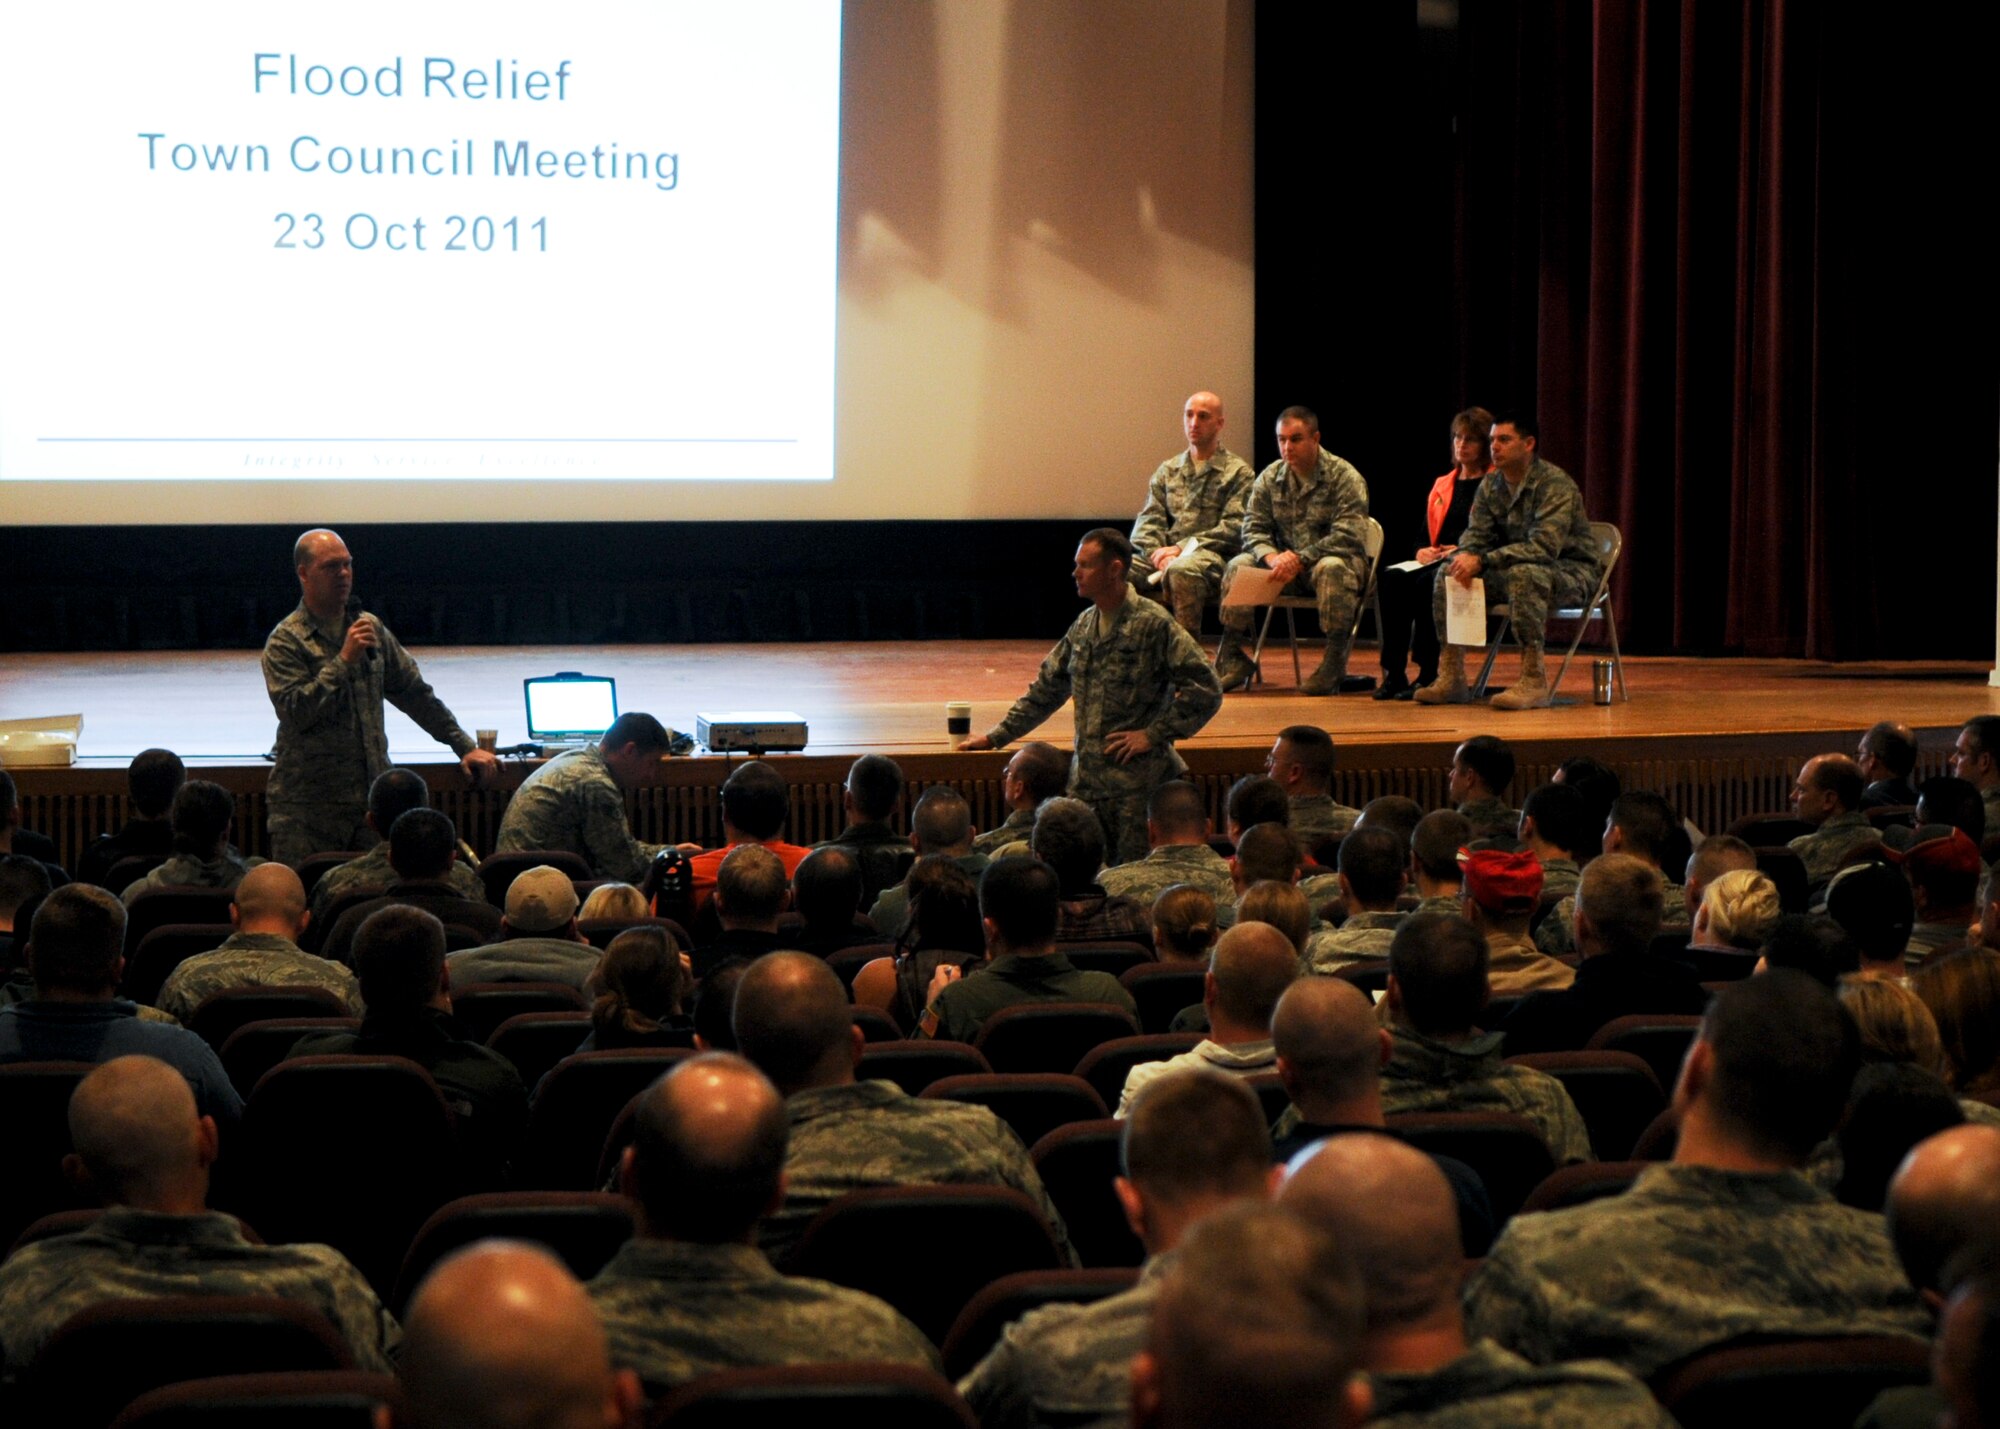 MINOT AIR FORCE BASE, N.D. - Airmen and their families affected by the historic 2011 Souris River flooding gathered at the base theater for a town hall meeting here, Oct. 23. Base leadership wanted to ensure critical information about seeking flood assistance and winterizing a home before the onset of winter was provided. (U.S. Air Force photo/Senior Airman Ashley N. Avecilla)